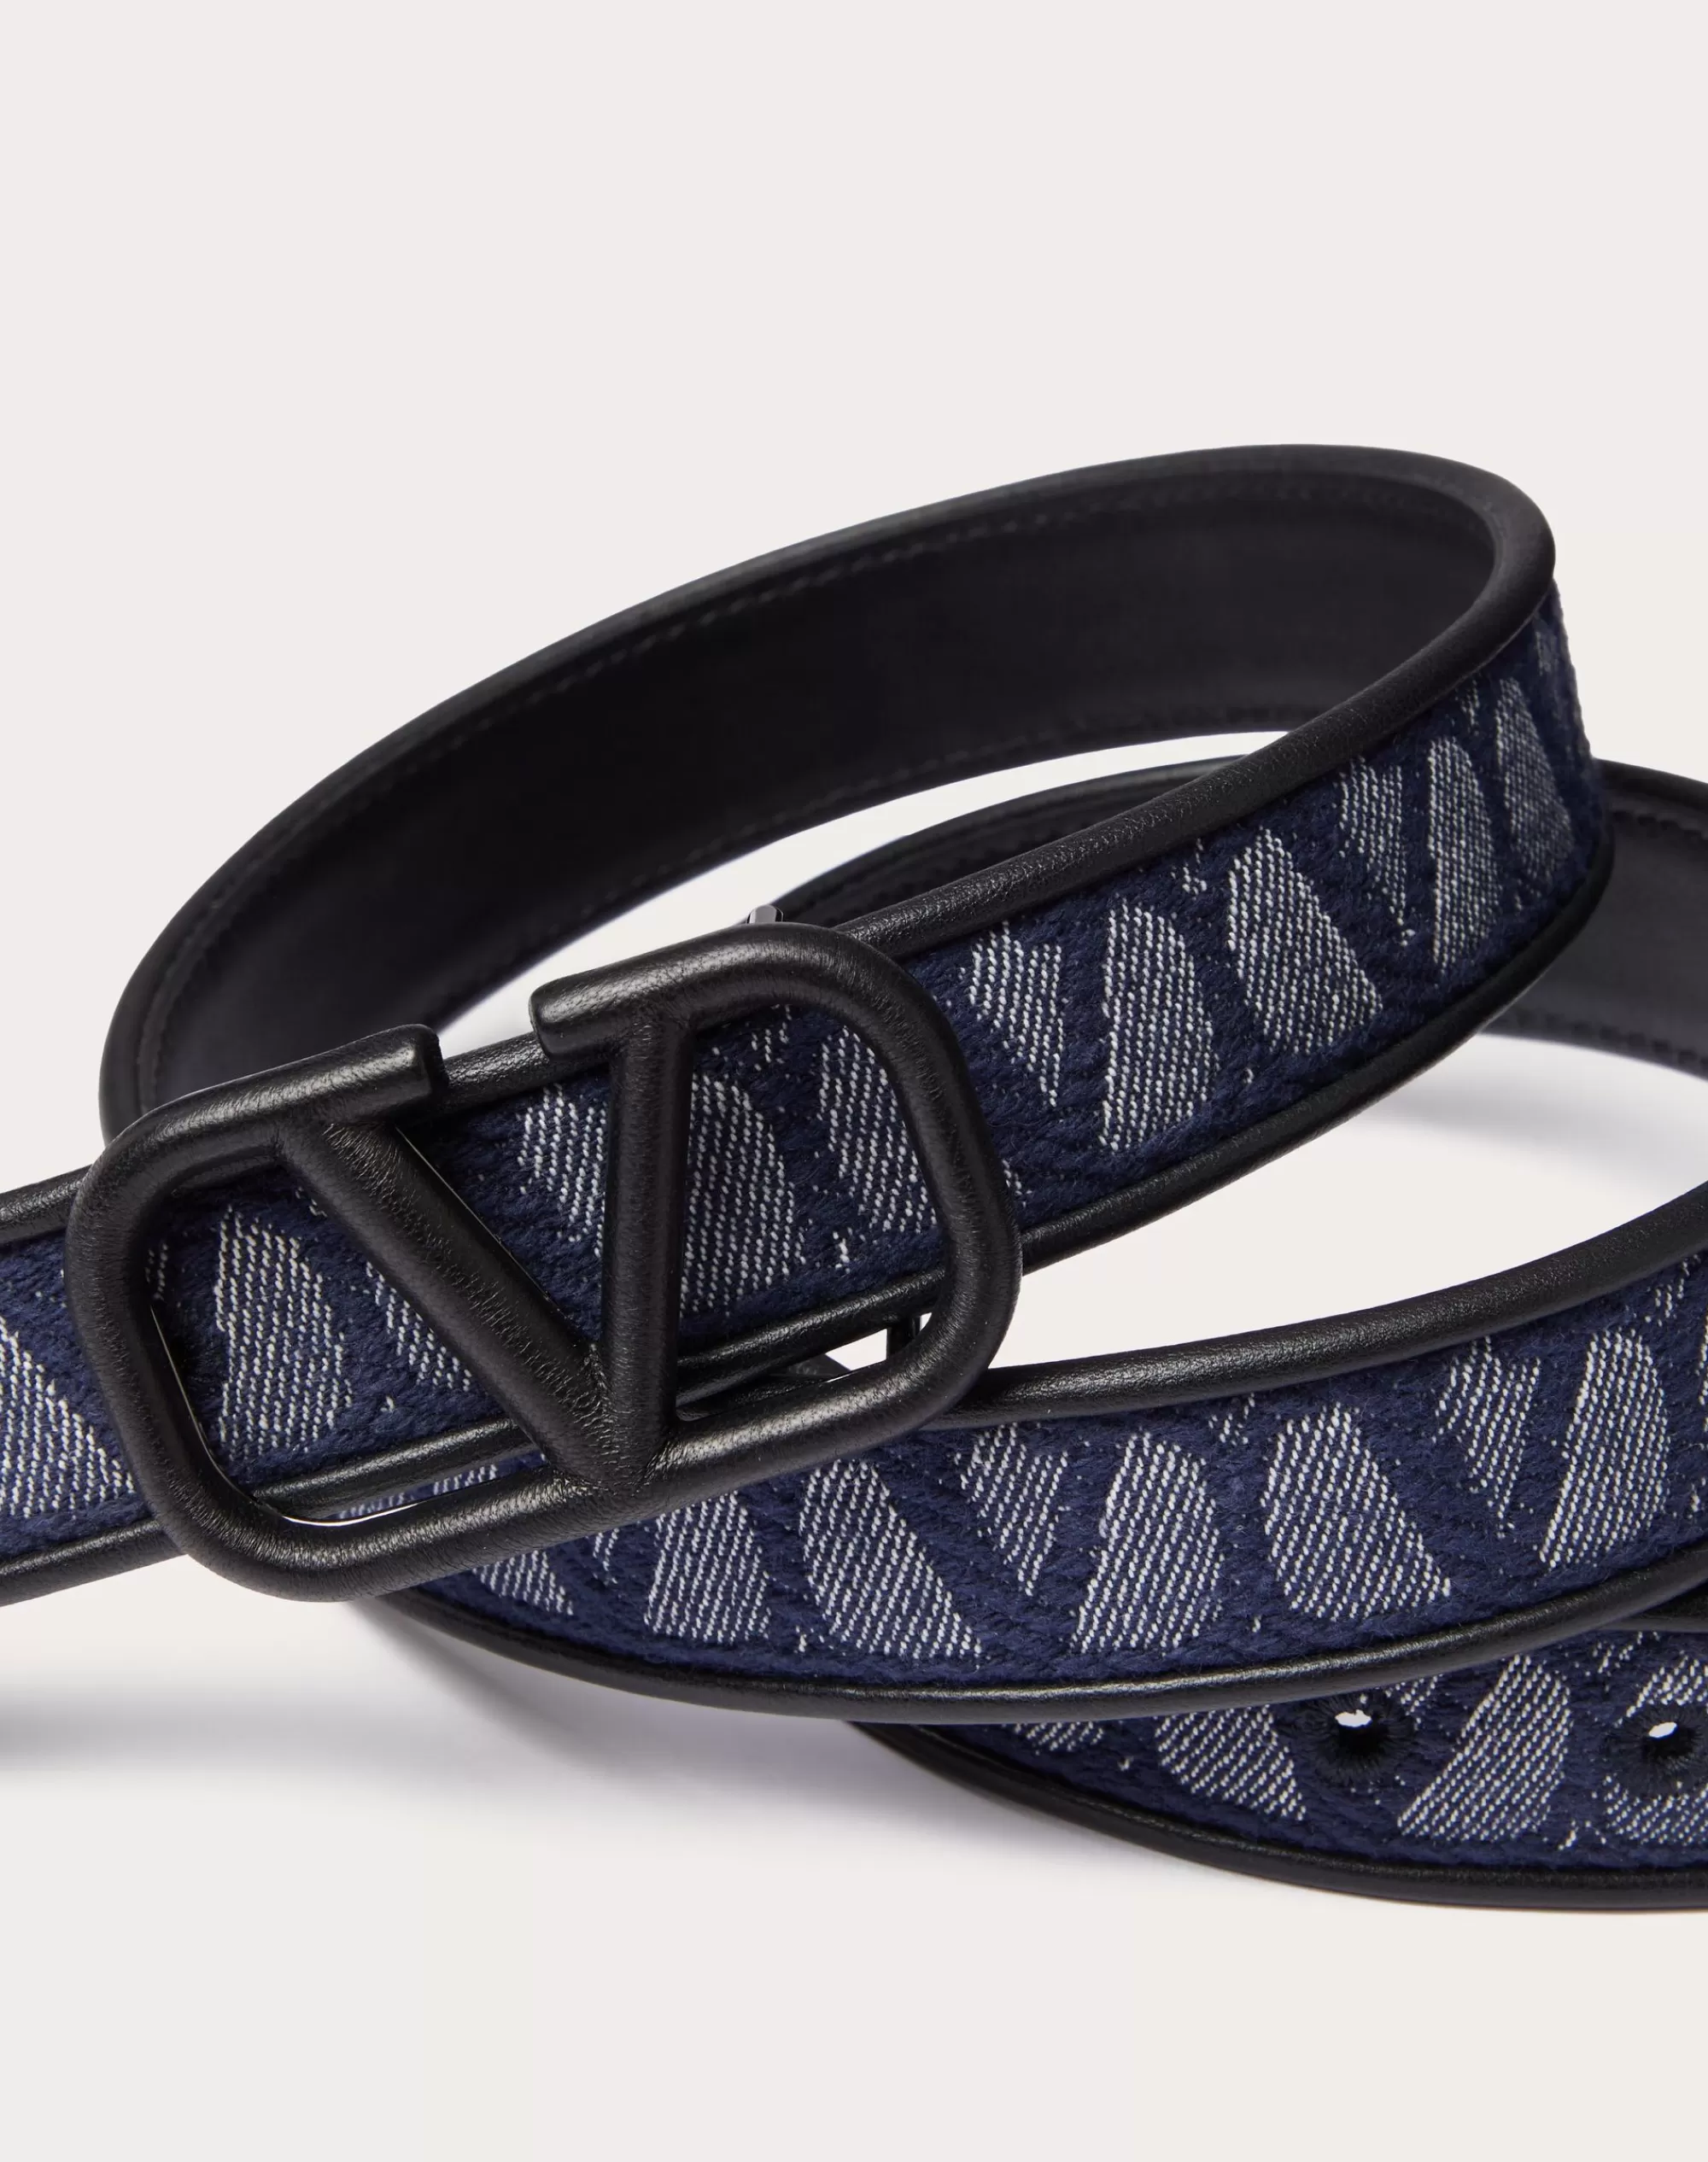 Valentino TOILE ICONOGRAPHE BELT IN JACQUARD FABRIC WITH LEATHER DETAILS Denim/black Discount